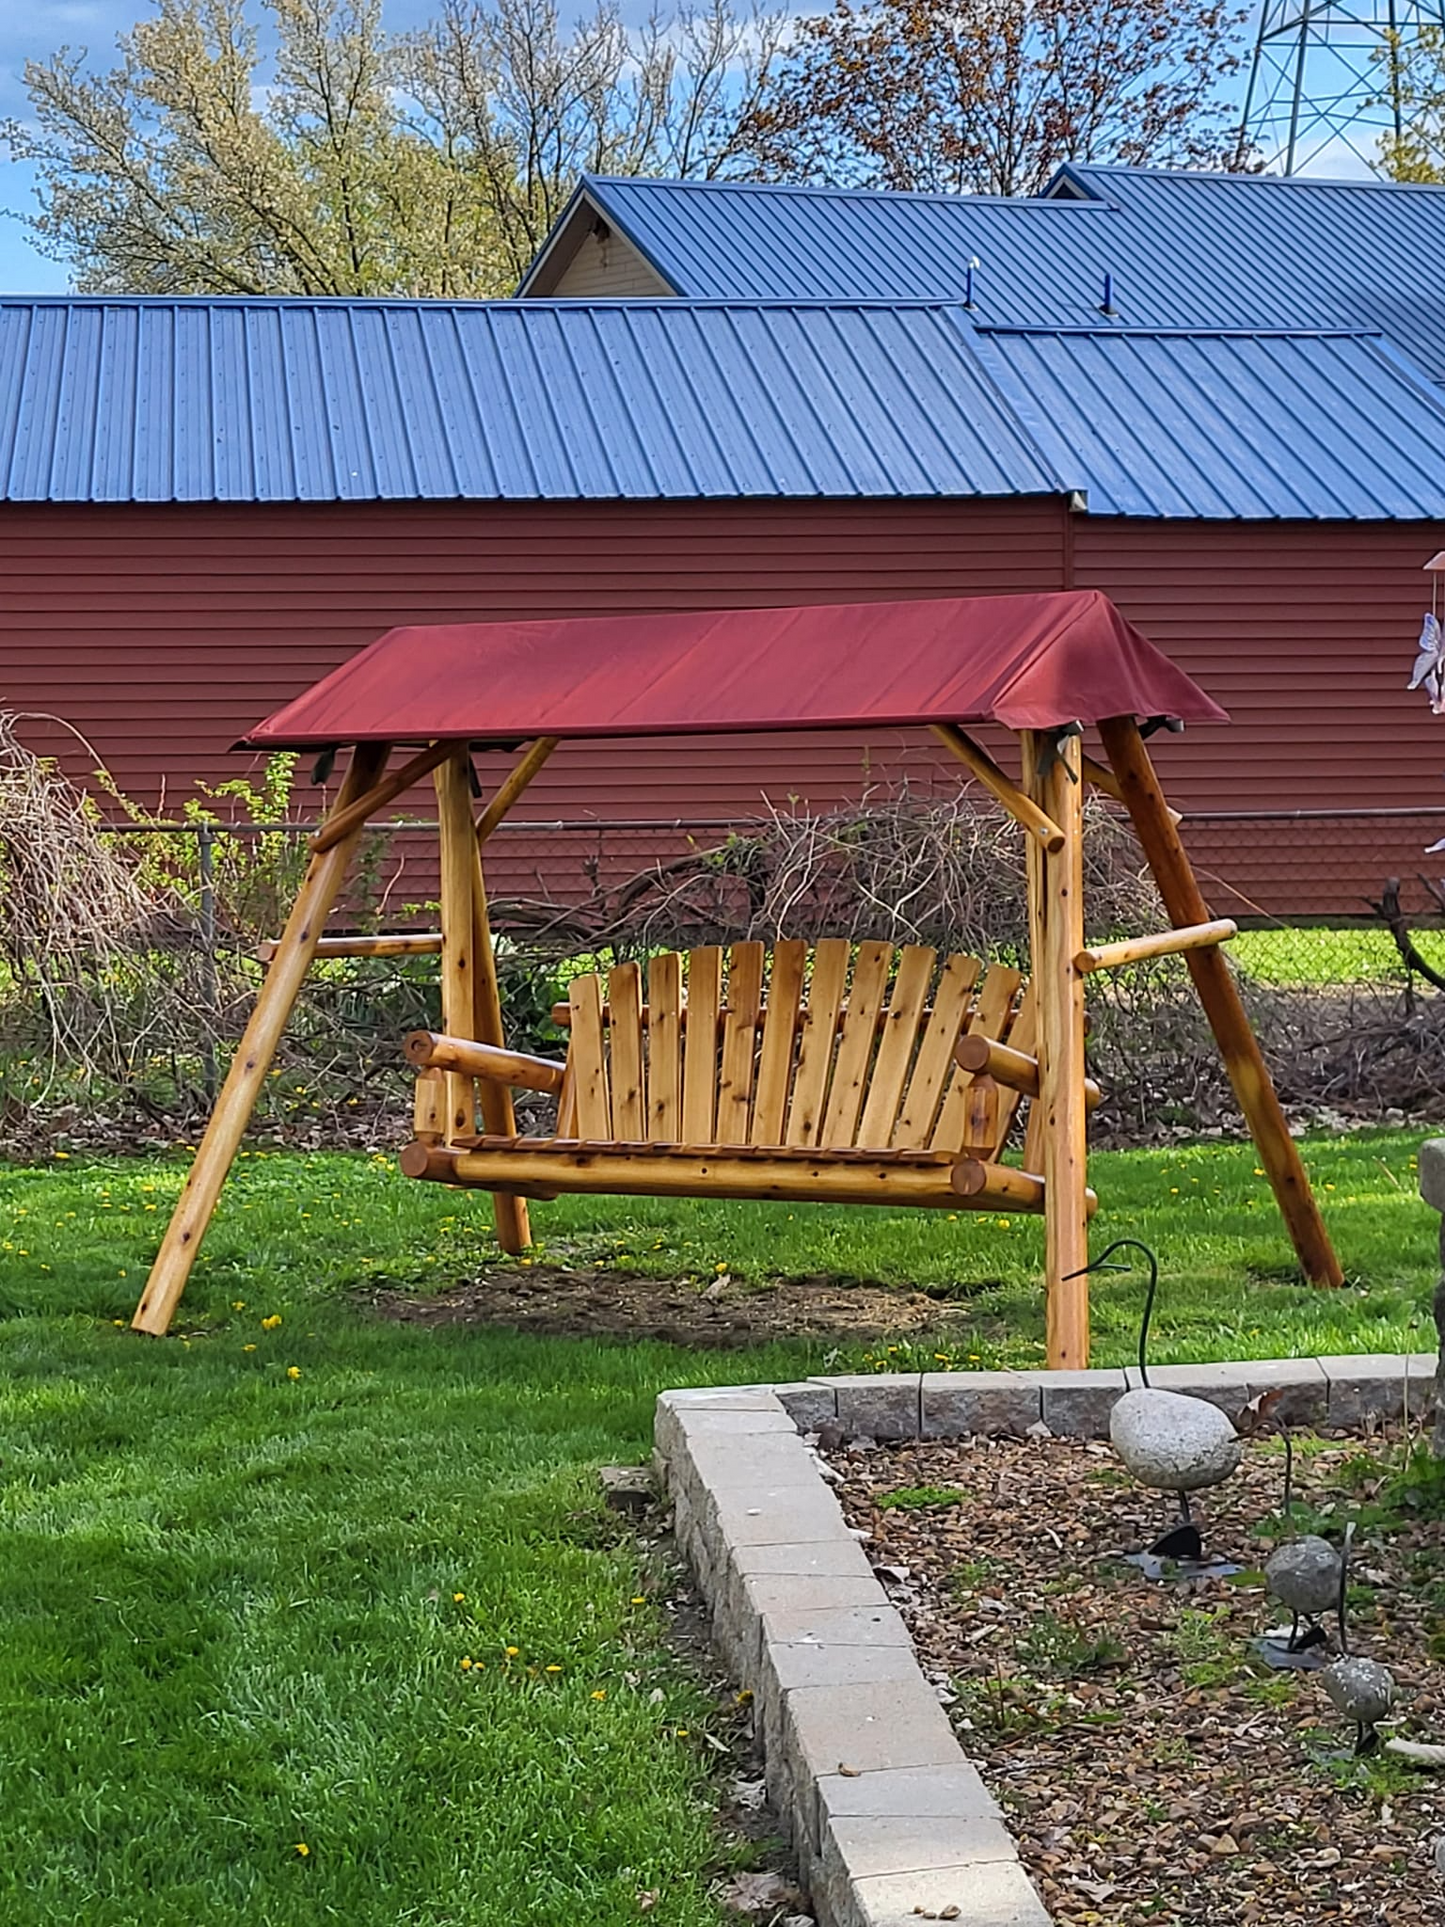 3 person cedar lawn swing varnished with burgundy canopy